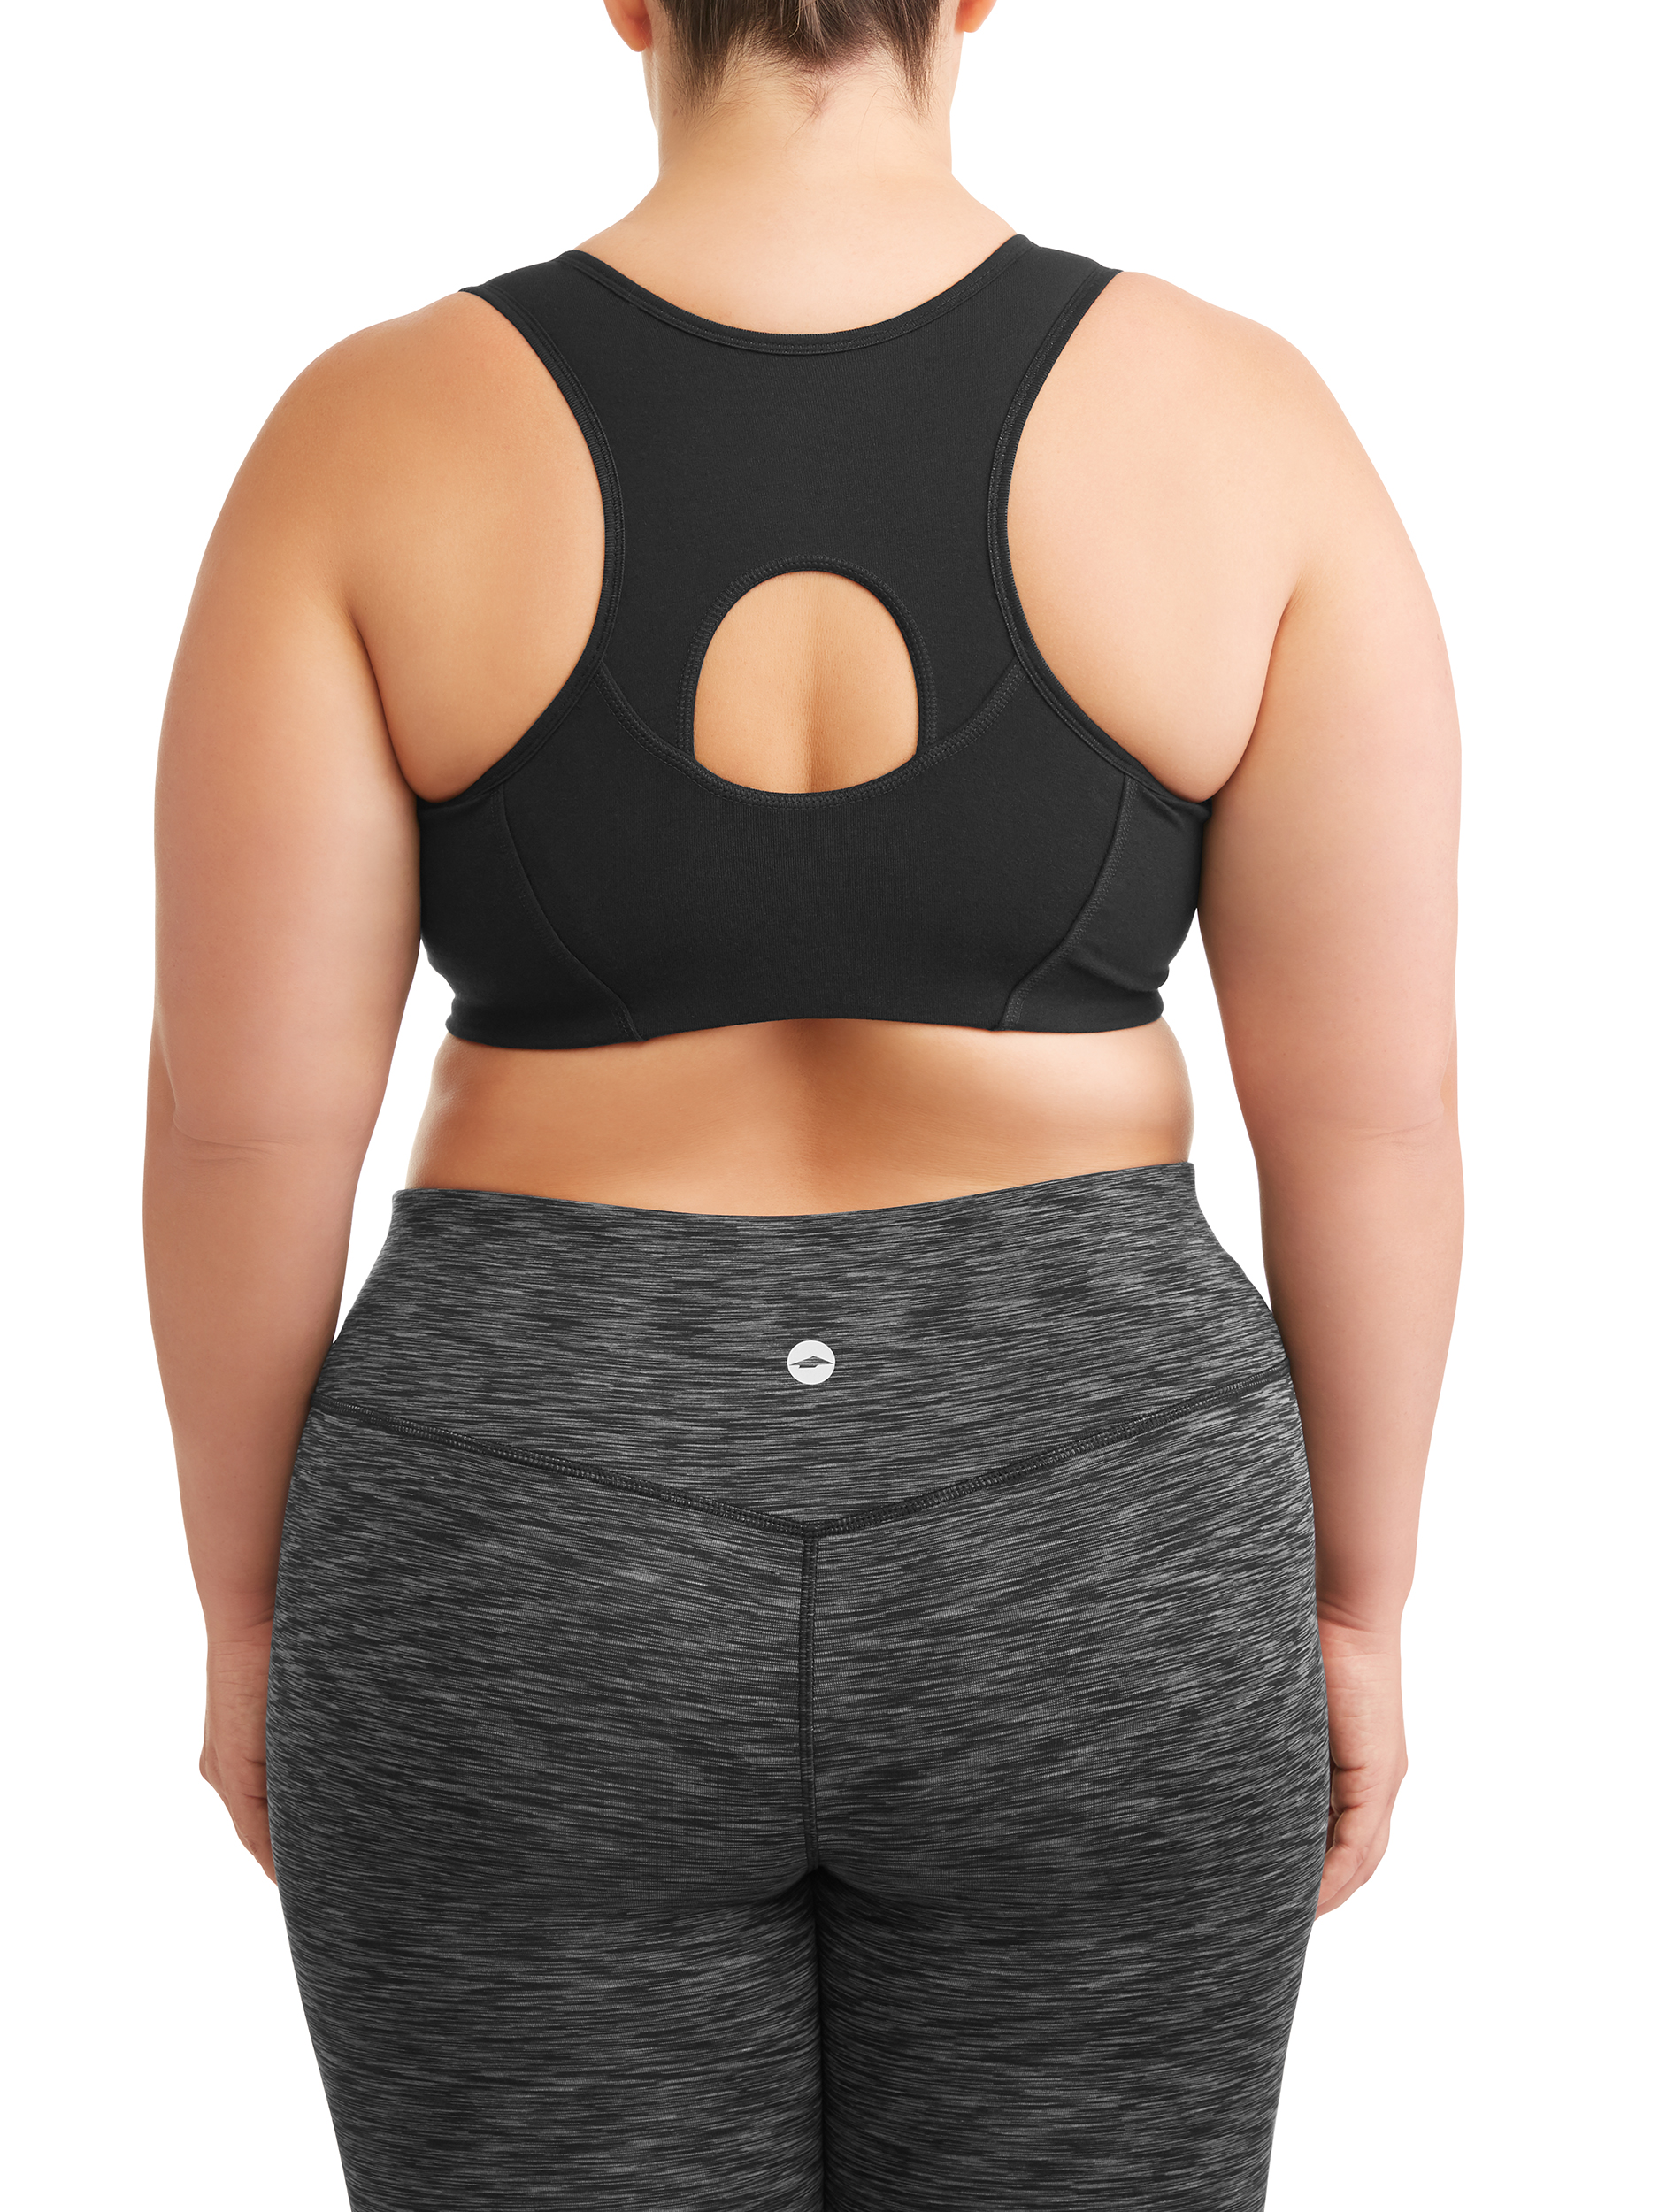 Athletic Works Women's Plus Size Zip Front Sports Bra - image 4 of 5